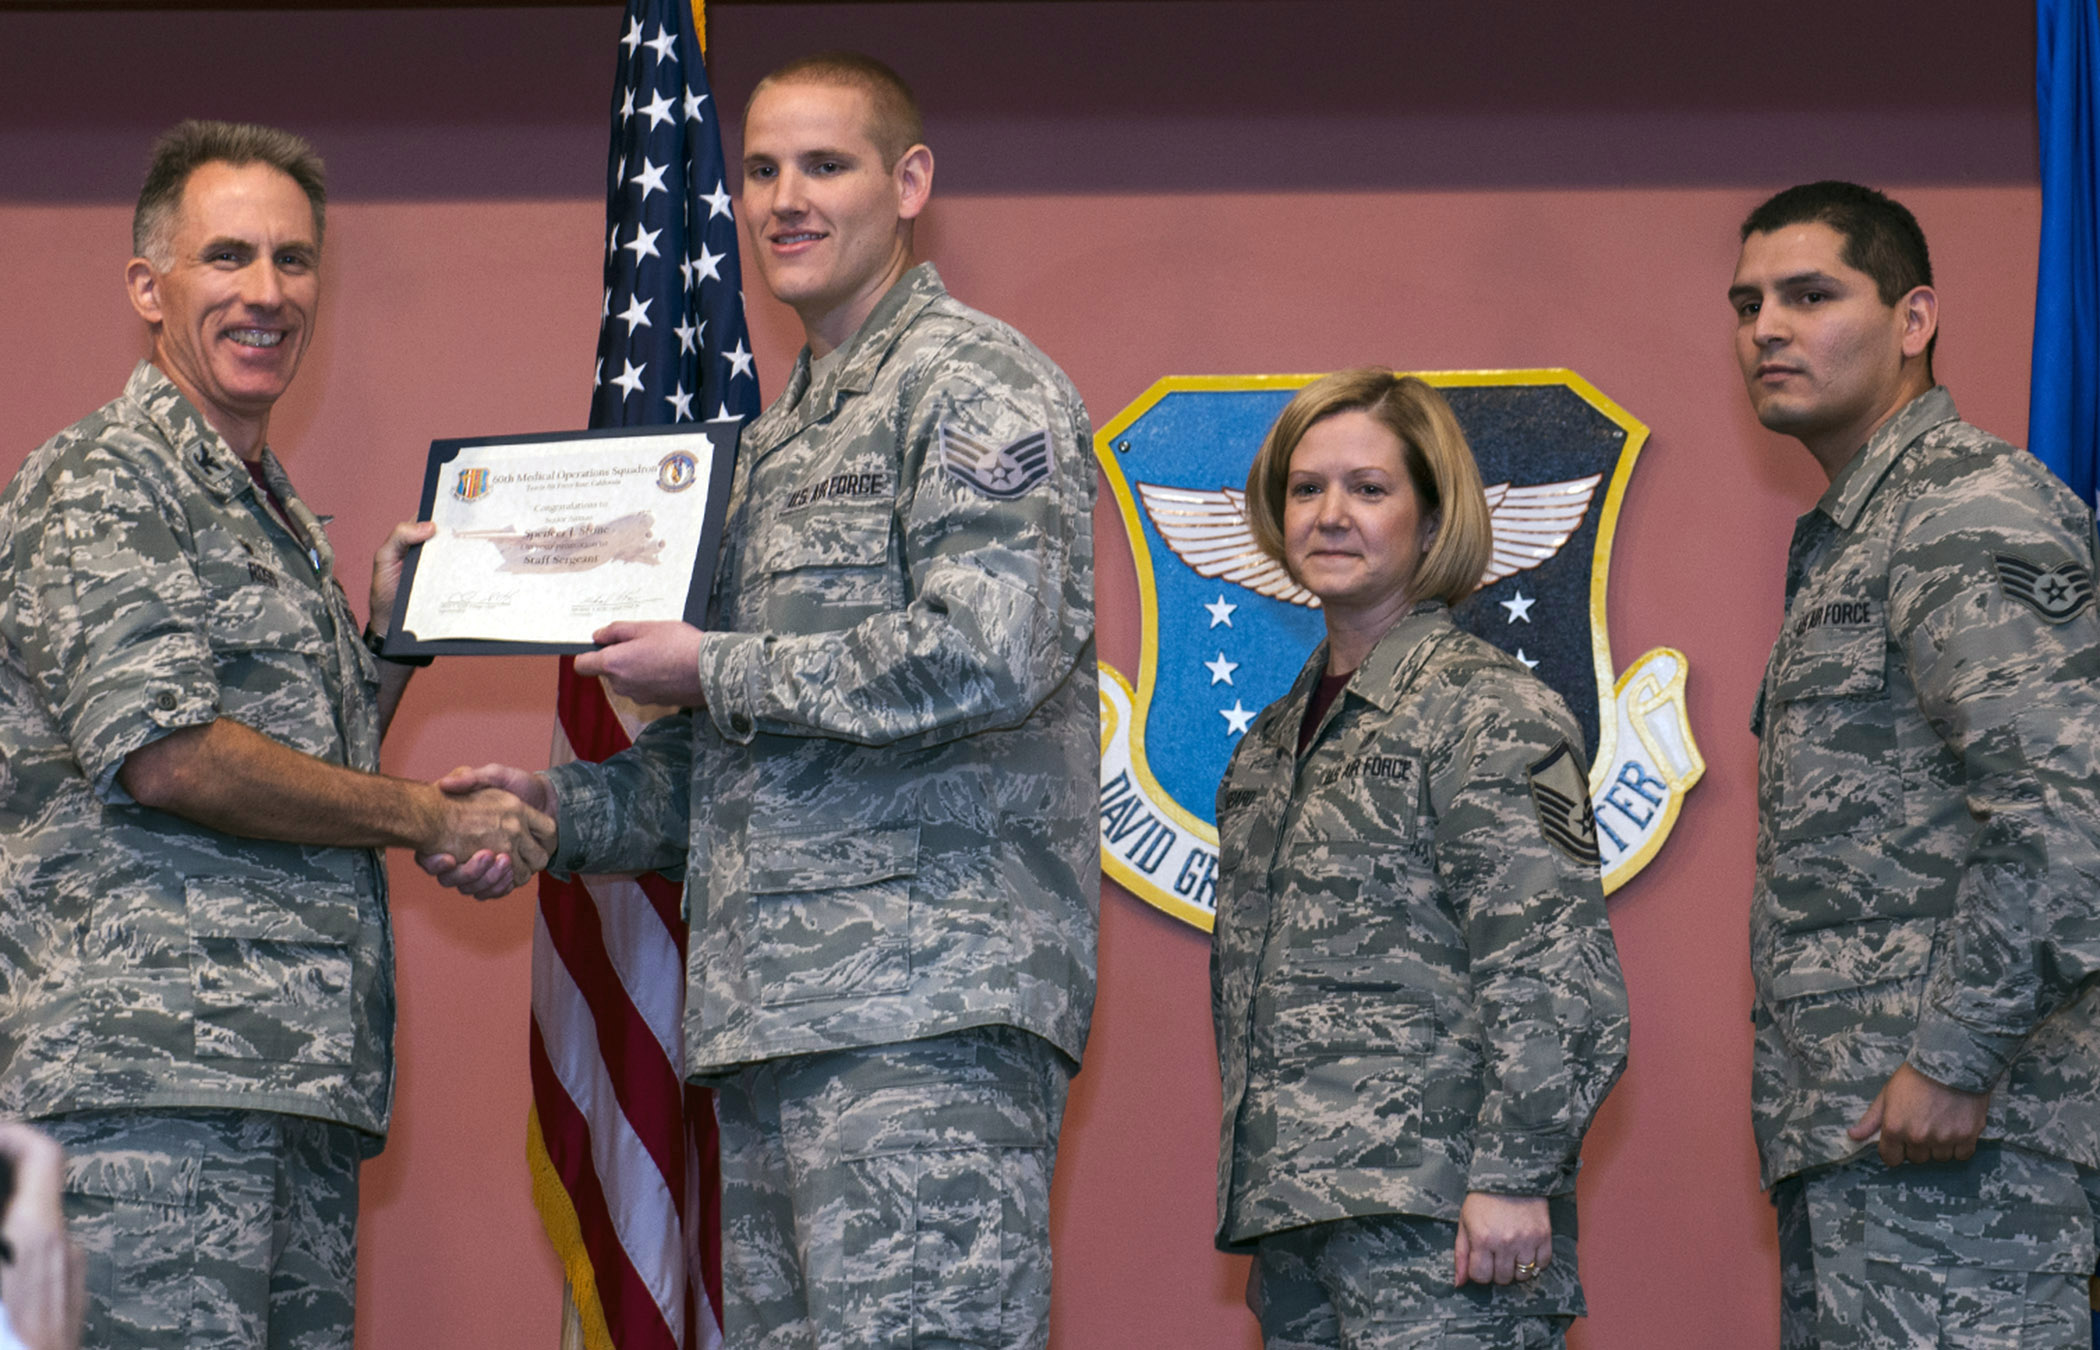 Photo Credit: Travis AFB CA: Col Michael Ross, Commander of the 60th Medical Operations Squadron presents Airman 1st Class Spencer Stone, 60th Medical Operations Squadron medical technician, with his regular promotion to senior airman at Travis Air Force Base, California, Oct. 30, 2015. Following his promotion, Stone was again promoted to the rank of staff sergeant by order of Air Force Chief of Staff Gen. Mark A. Welsh III. According to Air Force Instruction 36-502, the chief of staff of the Air Force has the authority to promote any enlisted member to the next higher grade. MSgt Tanya Hubbard and Staff Sgt. Roberto Davila, 60th Medical Group, tacked on Stone's new stripes during a group promotion ceremony at David Grant USAF Medical Center. Stone became the recipient of the rare honor following his heroic actions in August when he and two friends thwarted a potential terrorist attack on a train traveling to Paris. (U.S. Air Force photo by T.C. Perkins Jr.)